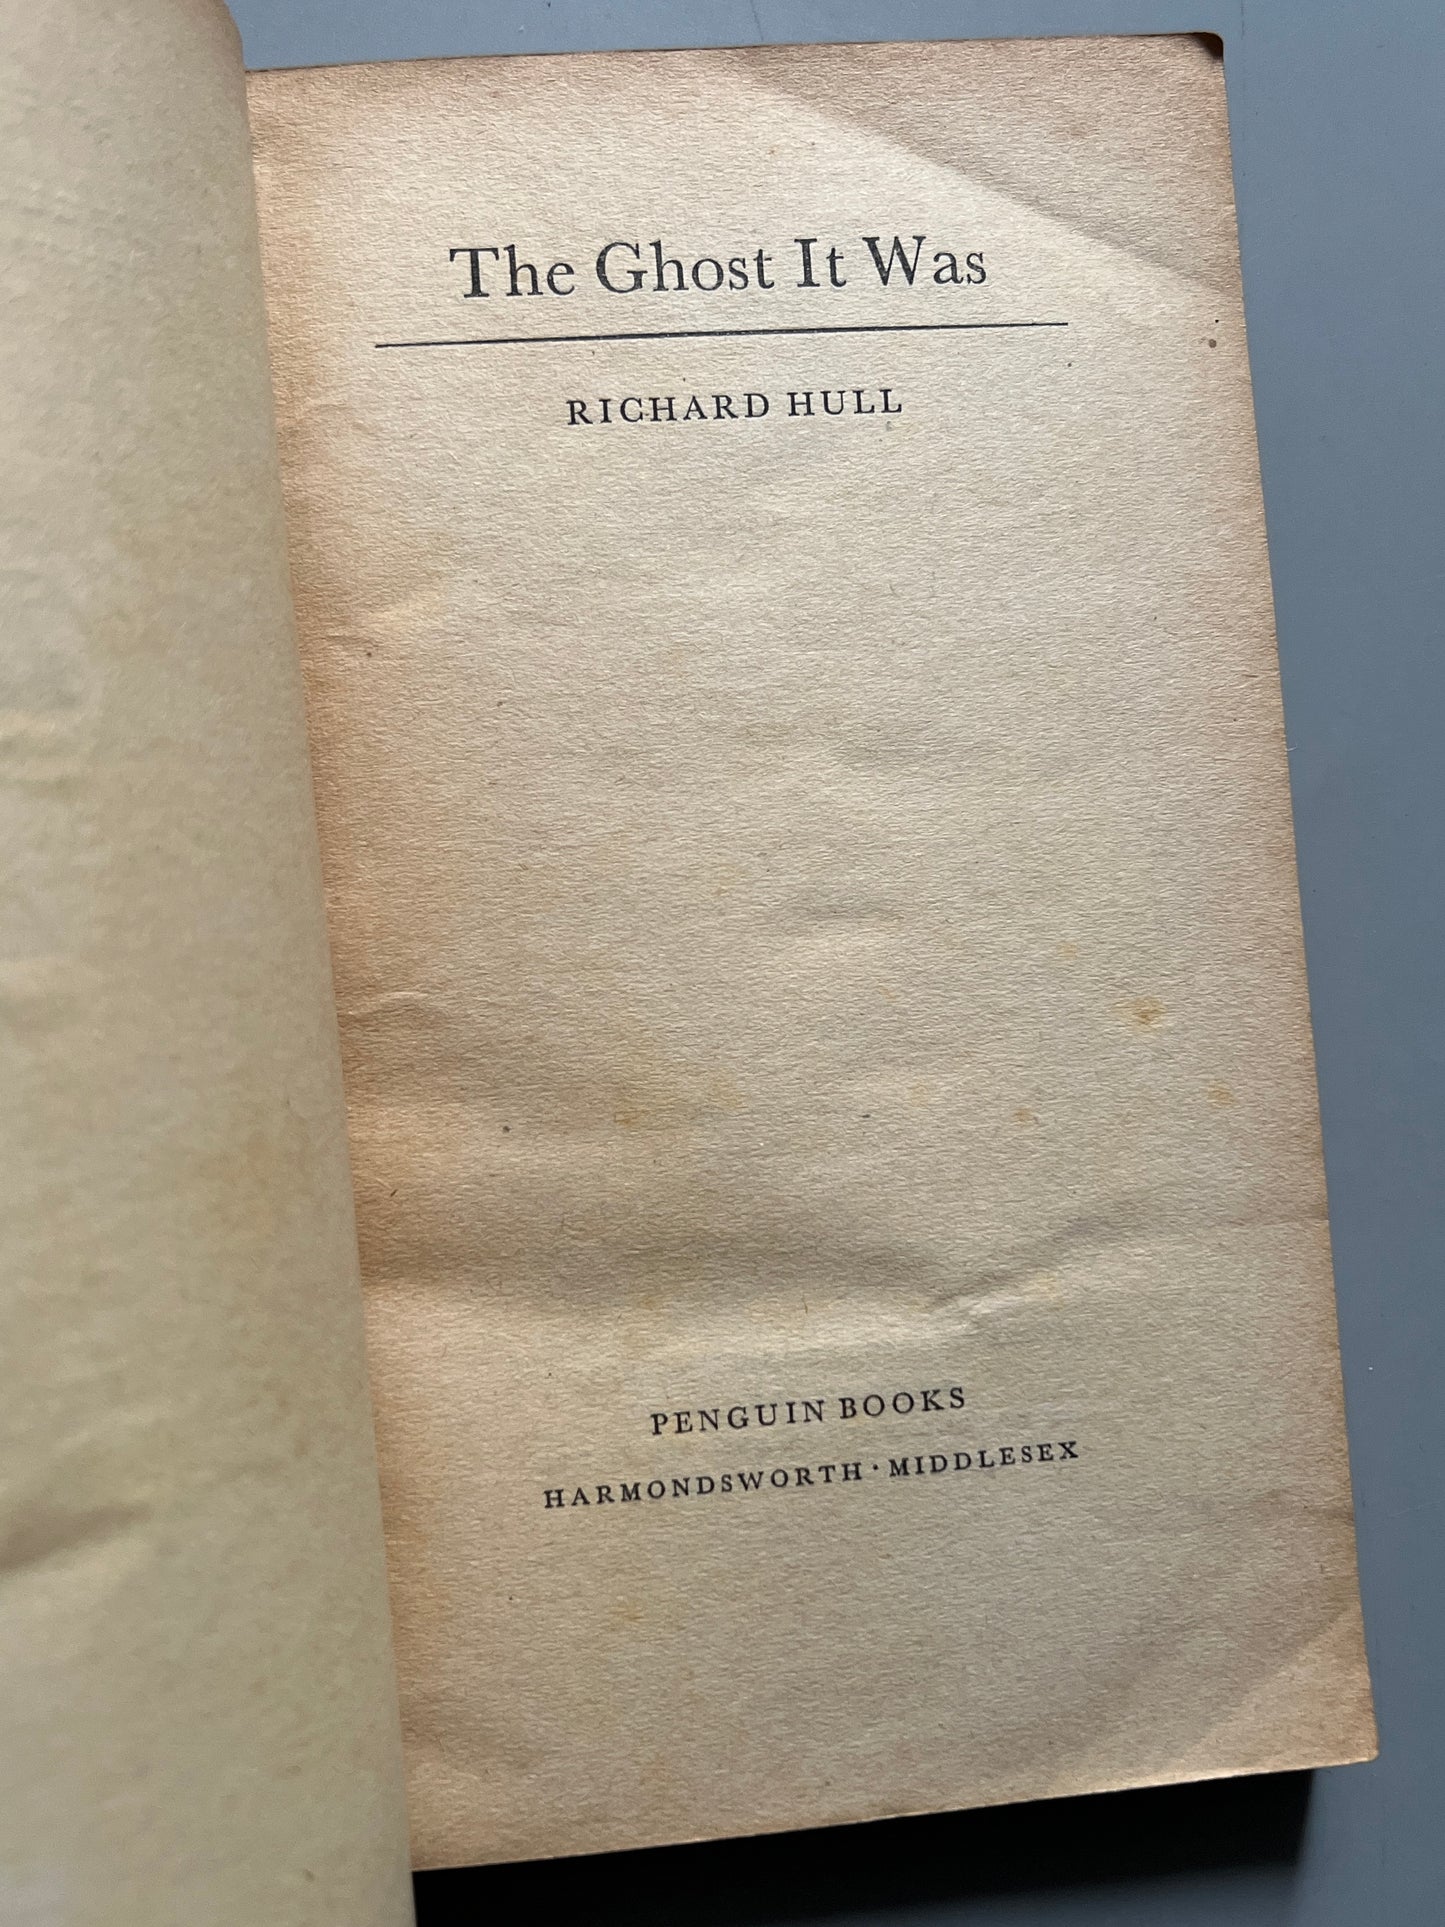 The ghost it was, Richard Hull  - Penguin Books, 1950